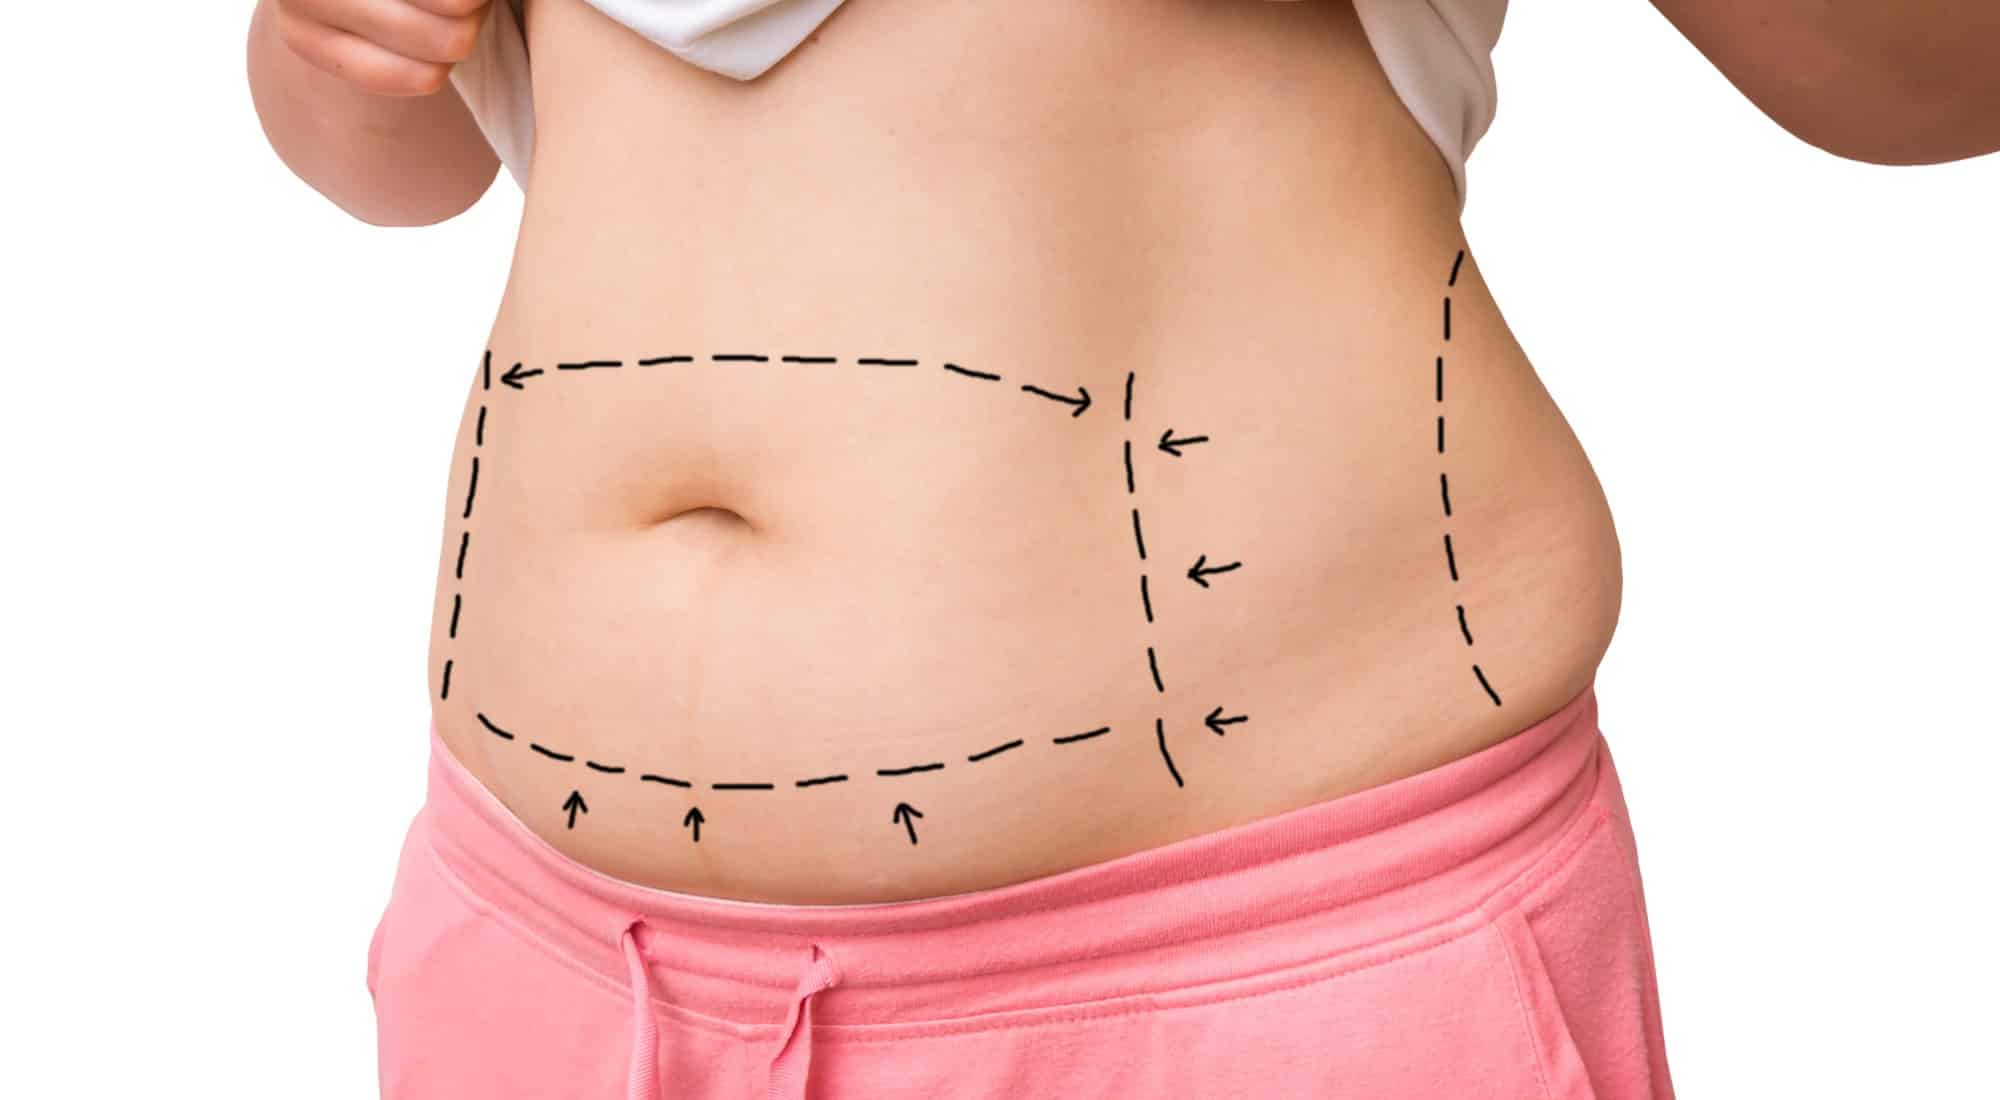 Liposuction vs Tummy Tuck: The Differences